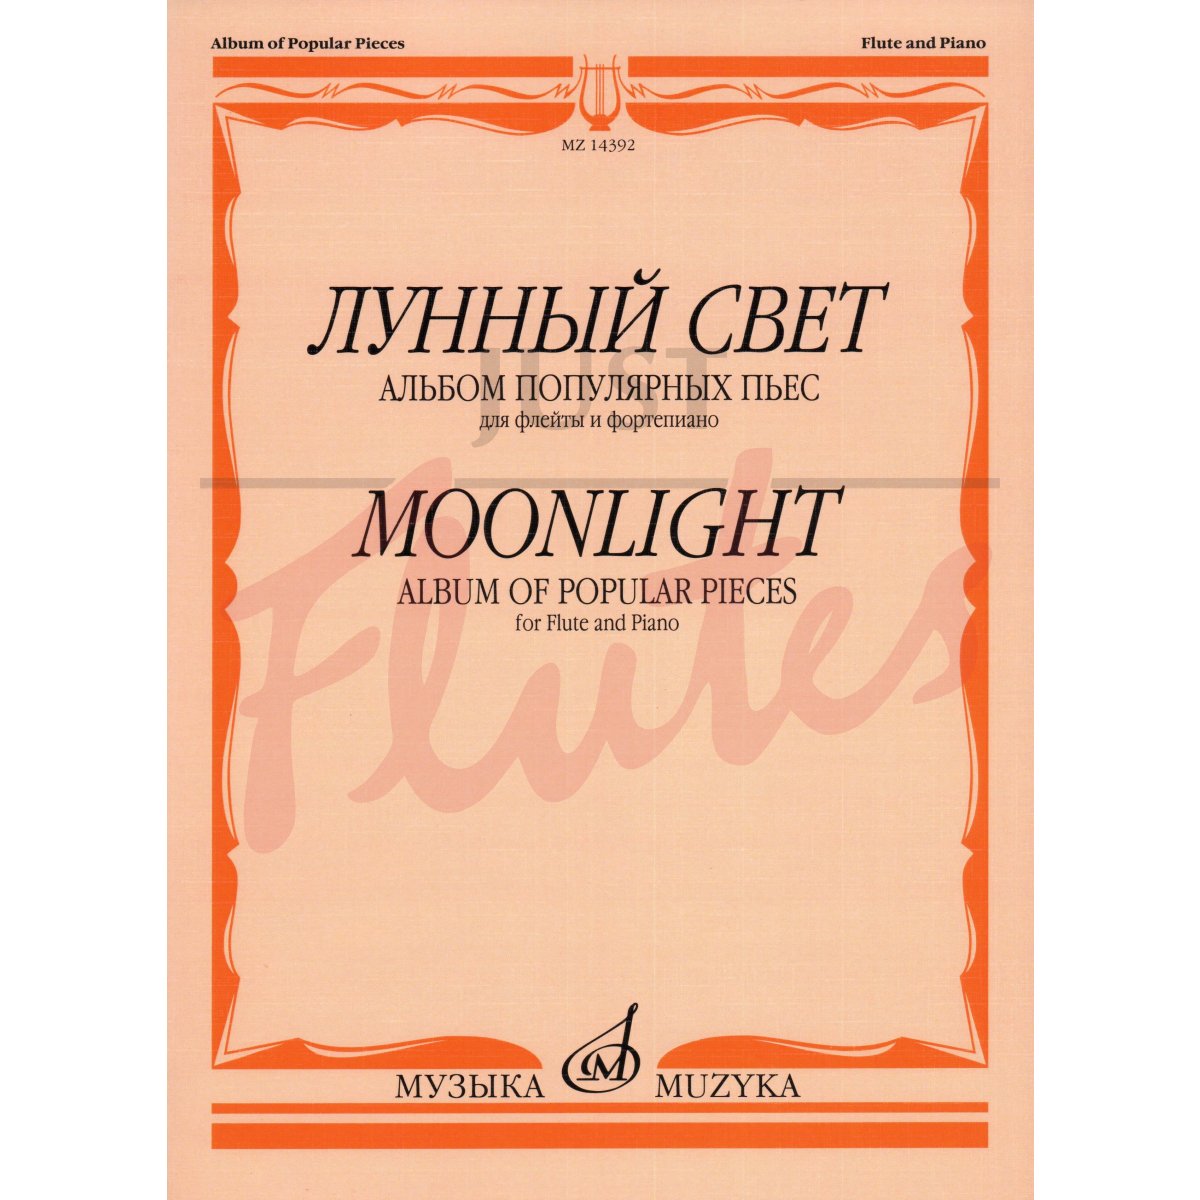 Moonlight: Album of Popular Pieces for Flute and Piano